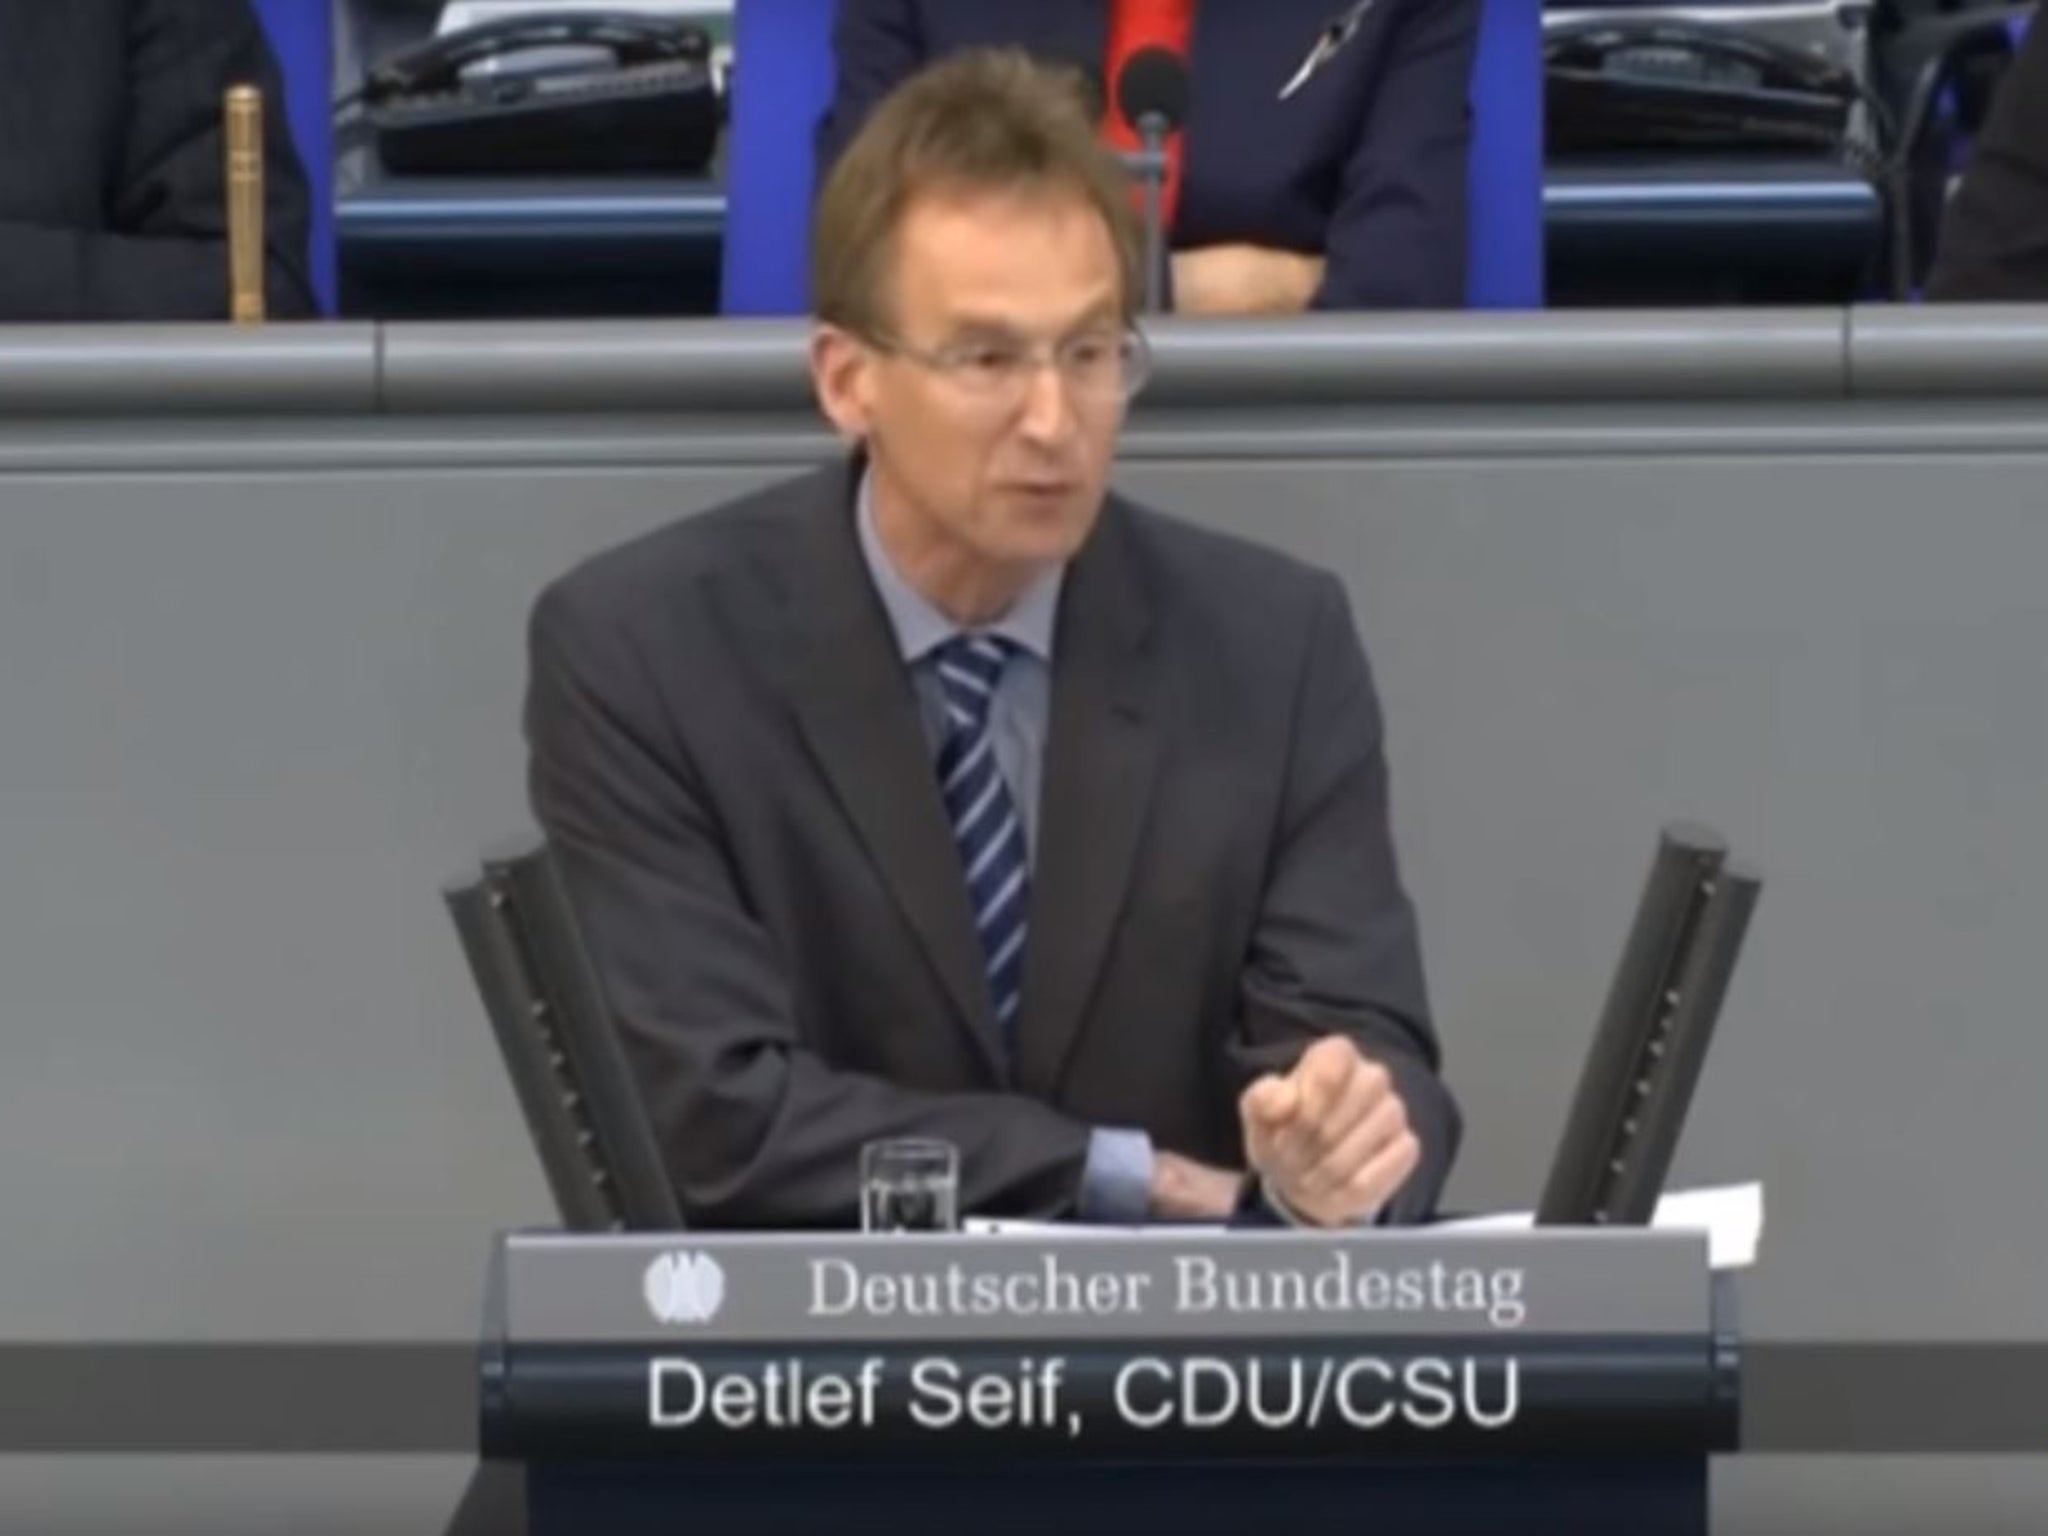 Detlef Seif reciting the controversial poem in the Bundestag